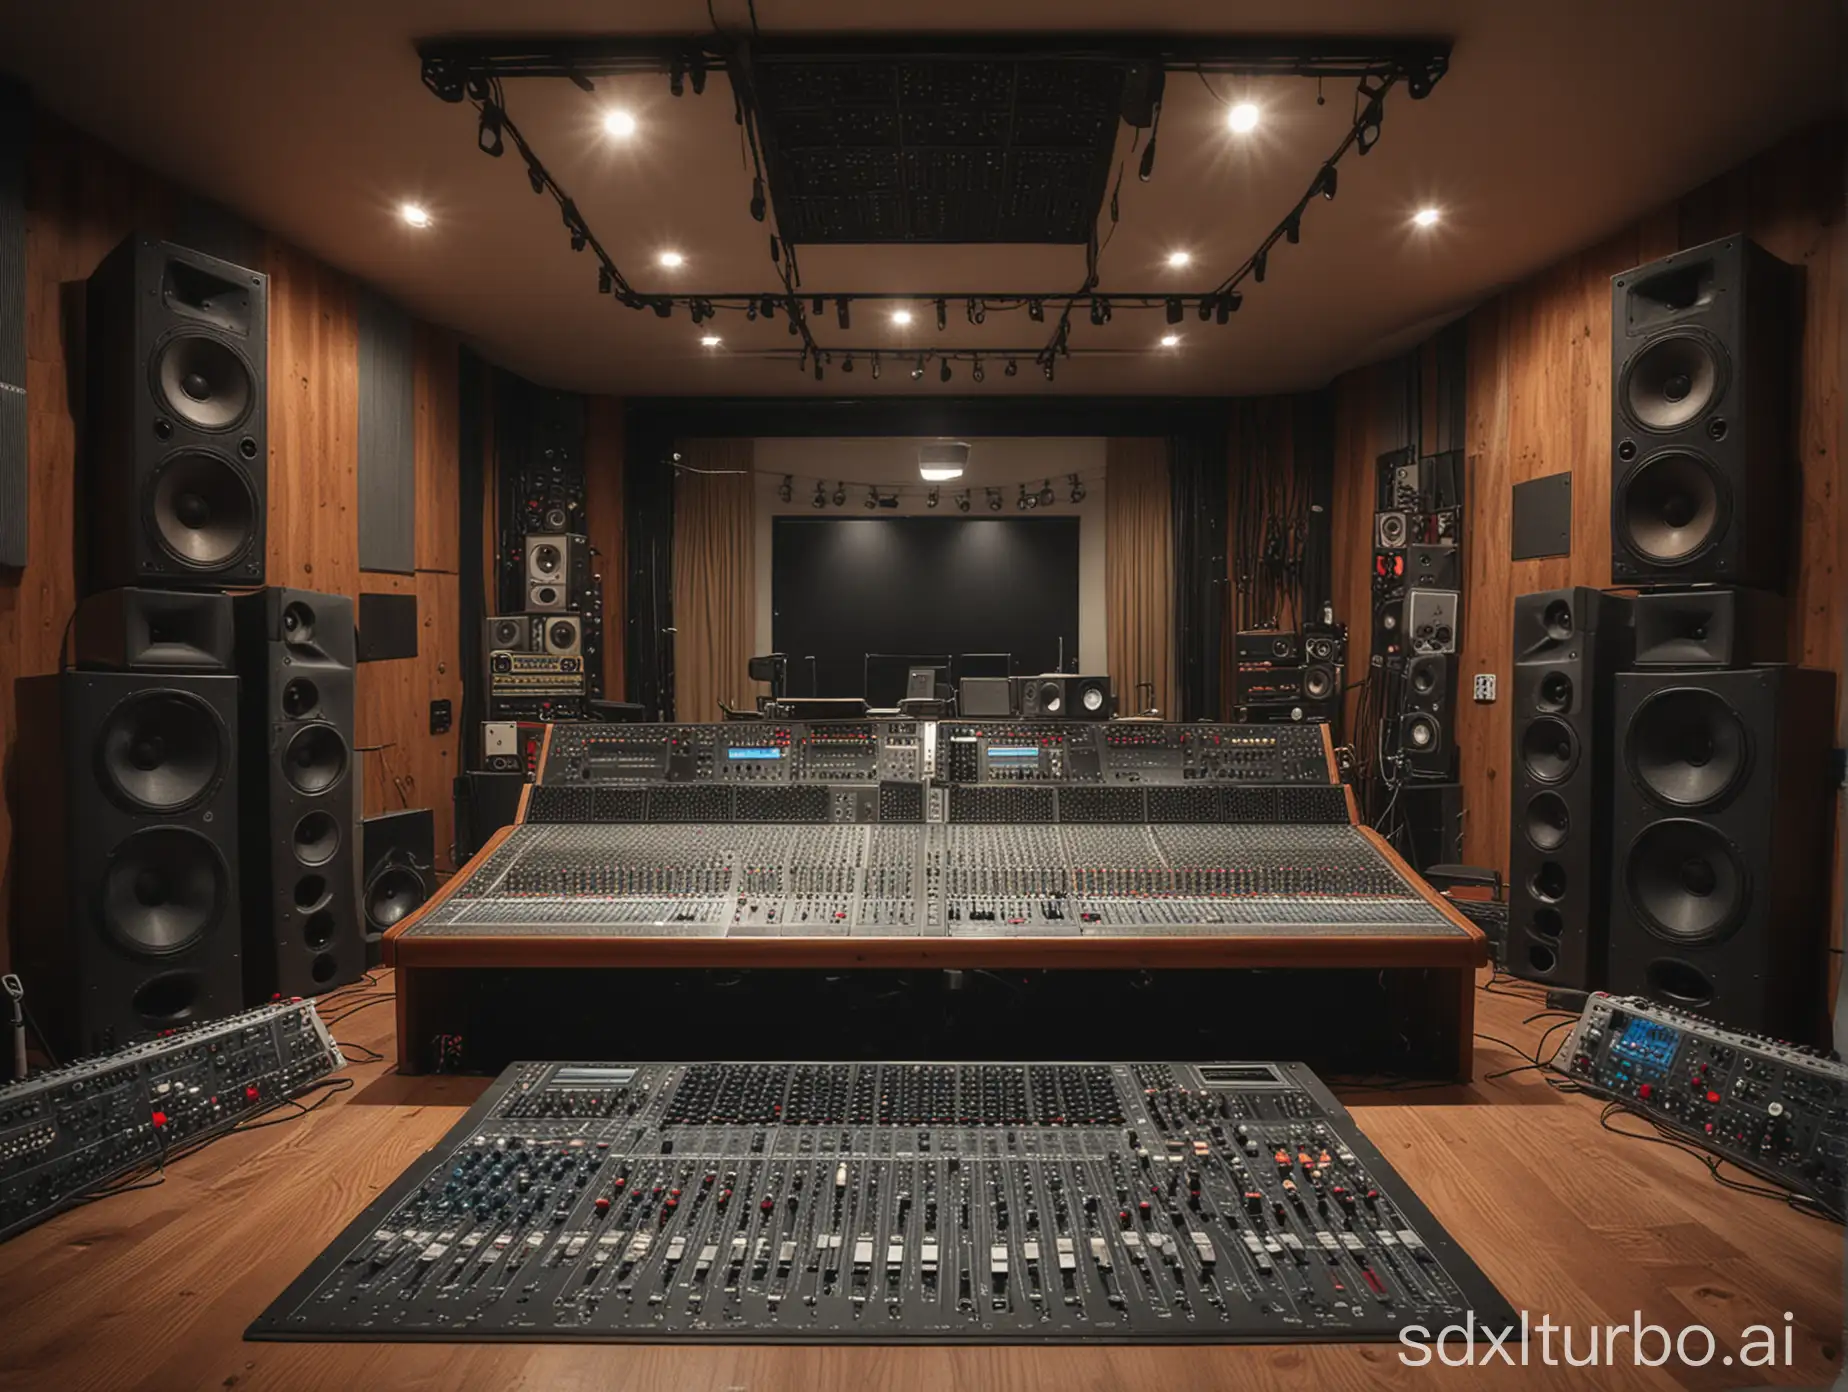 Create a photograph of a recording studio interior, shot with a wide angle lens. Image of the mixing board with speakers and effects racks. Very realistic.